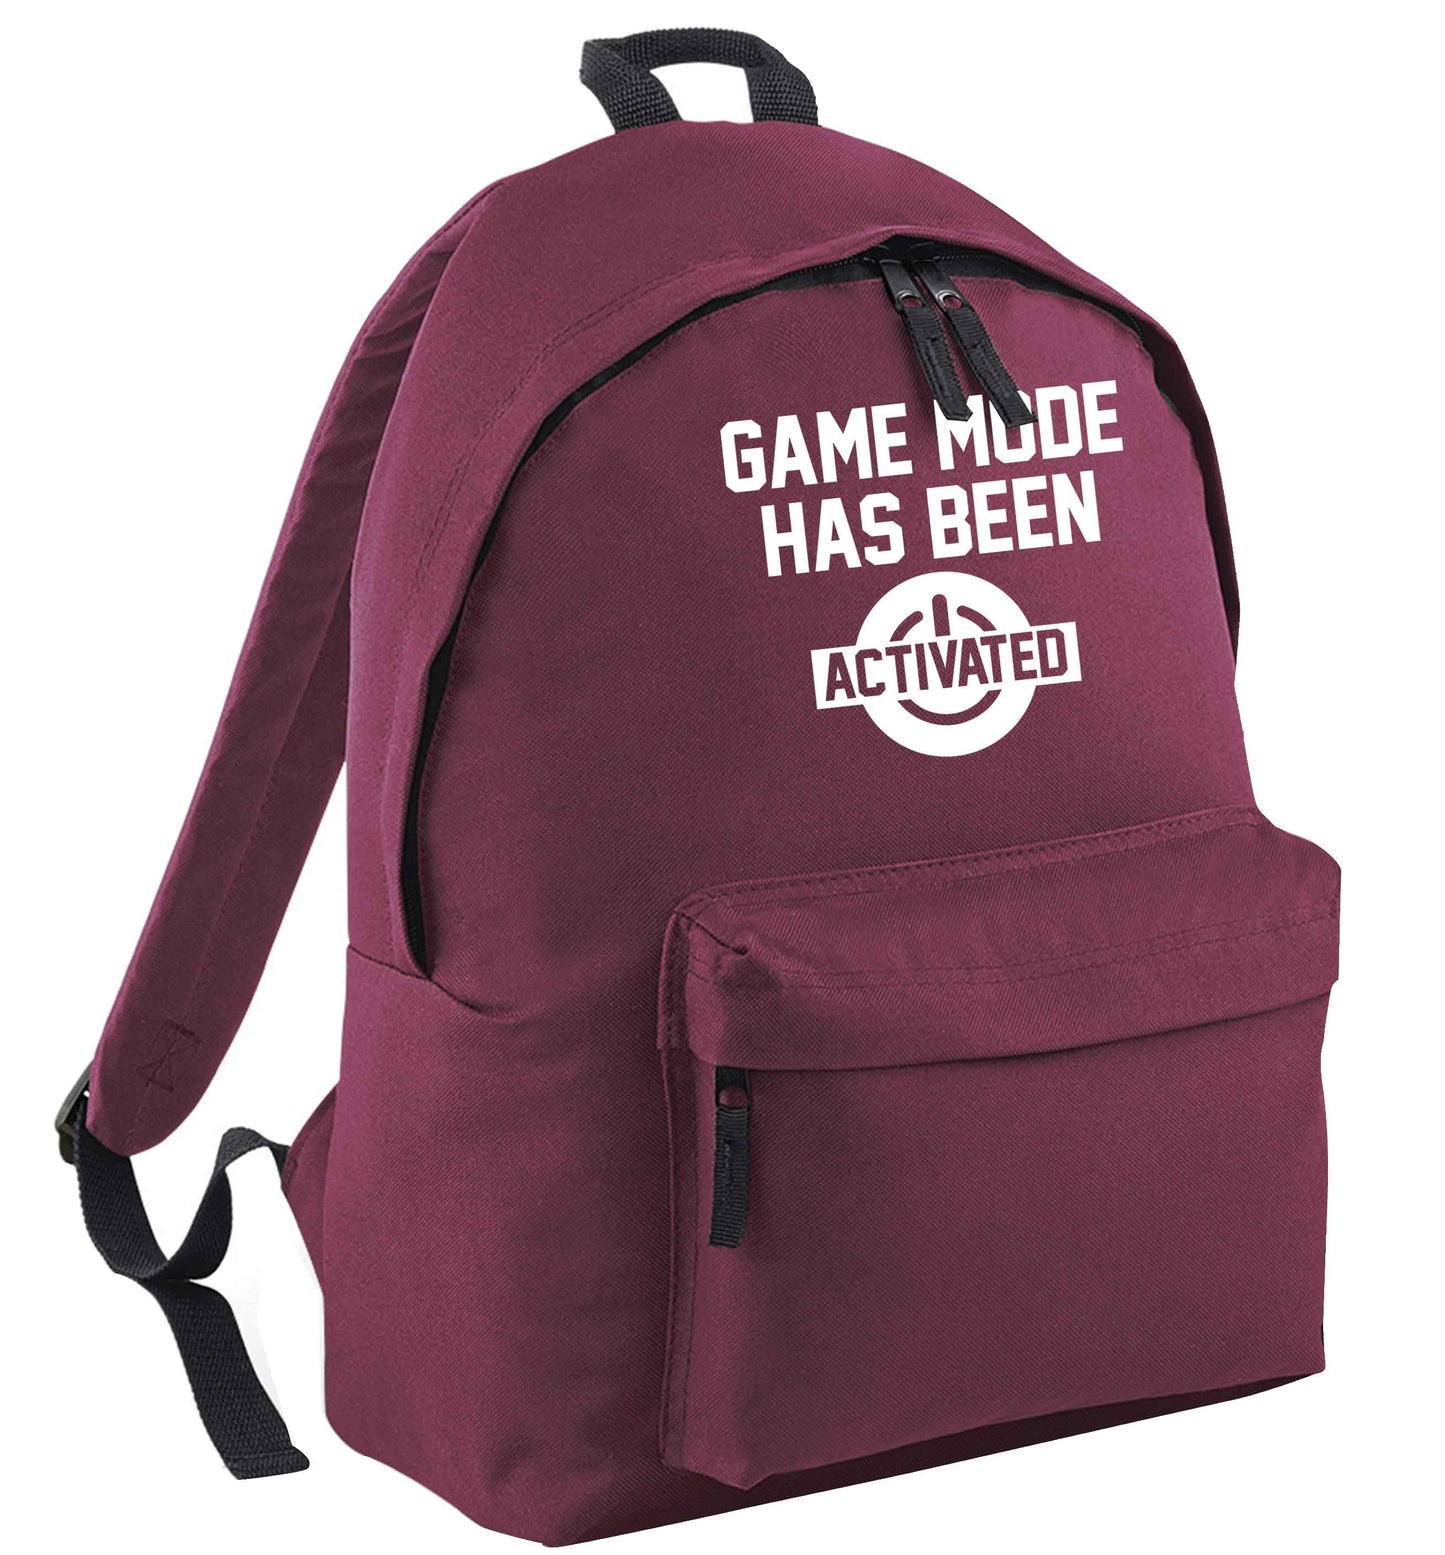 Game mode has been activated | Children's backpack